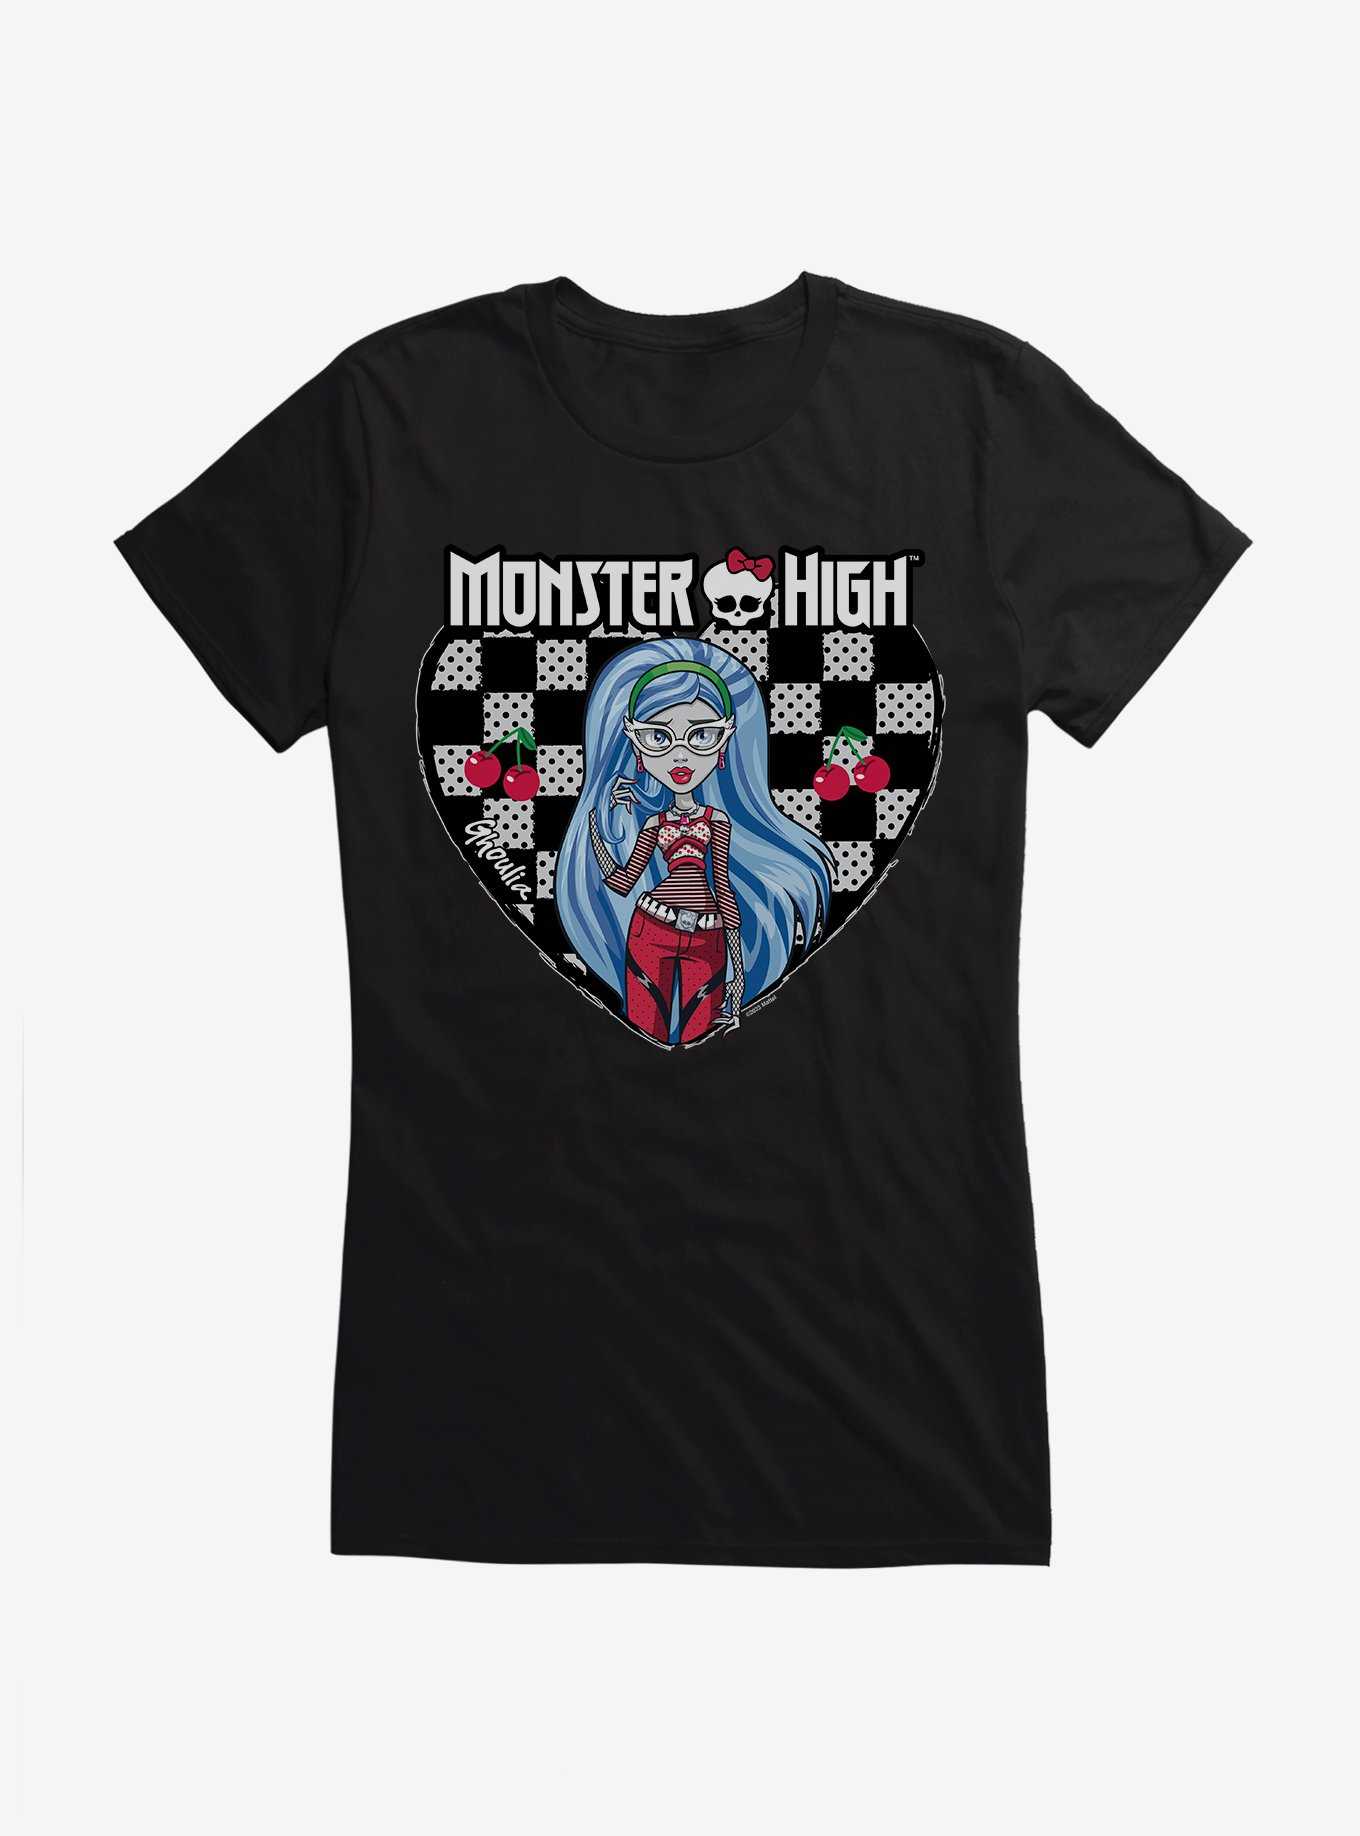 Monster High Ghoulia Yelps Checkerboard Heart Girls T-Shirt, , hi-res